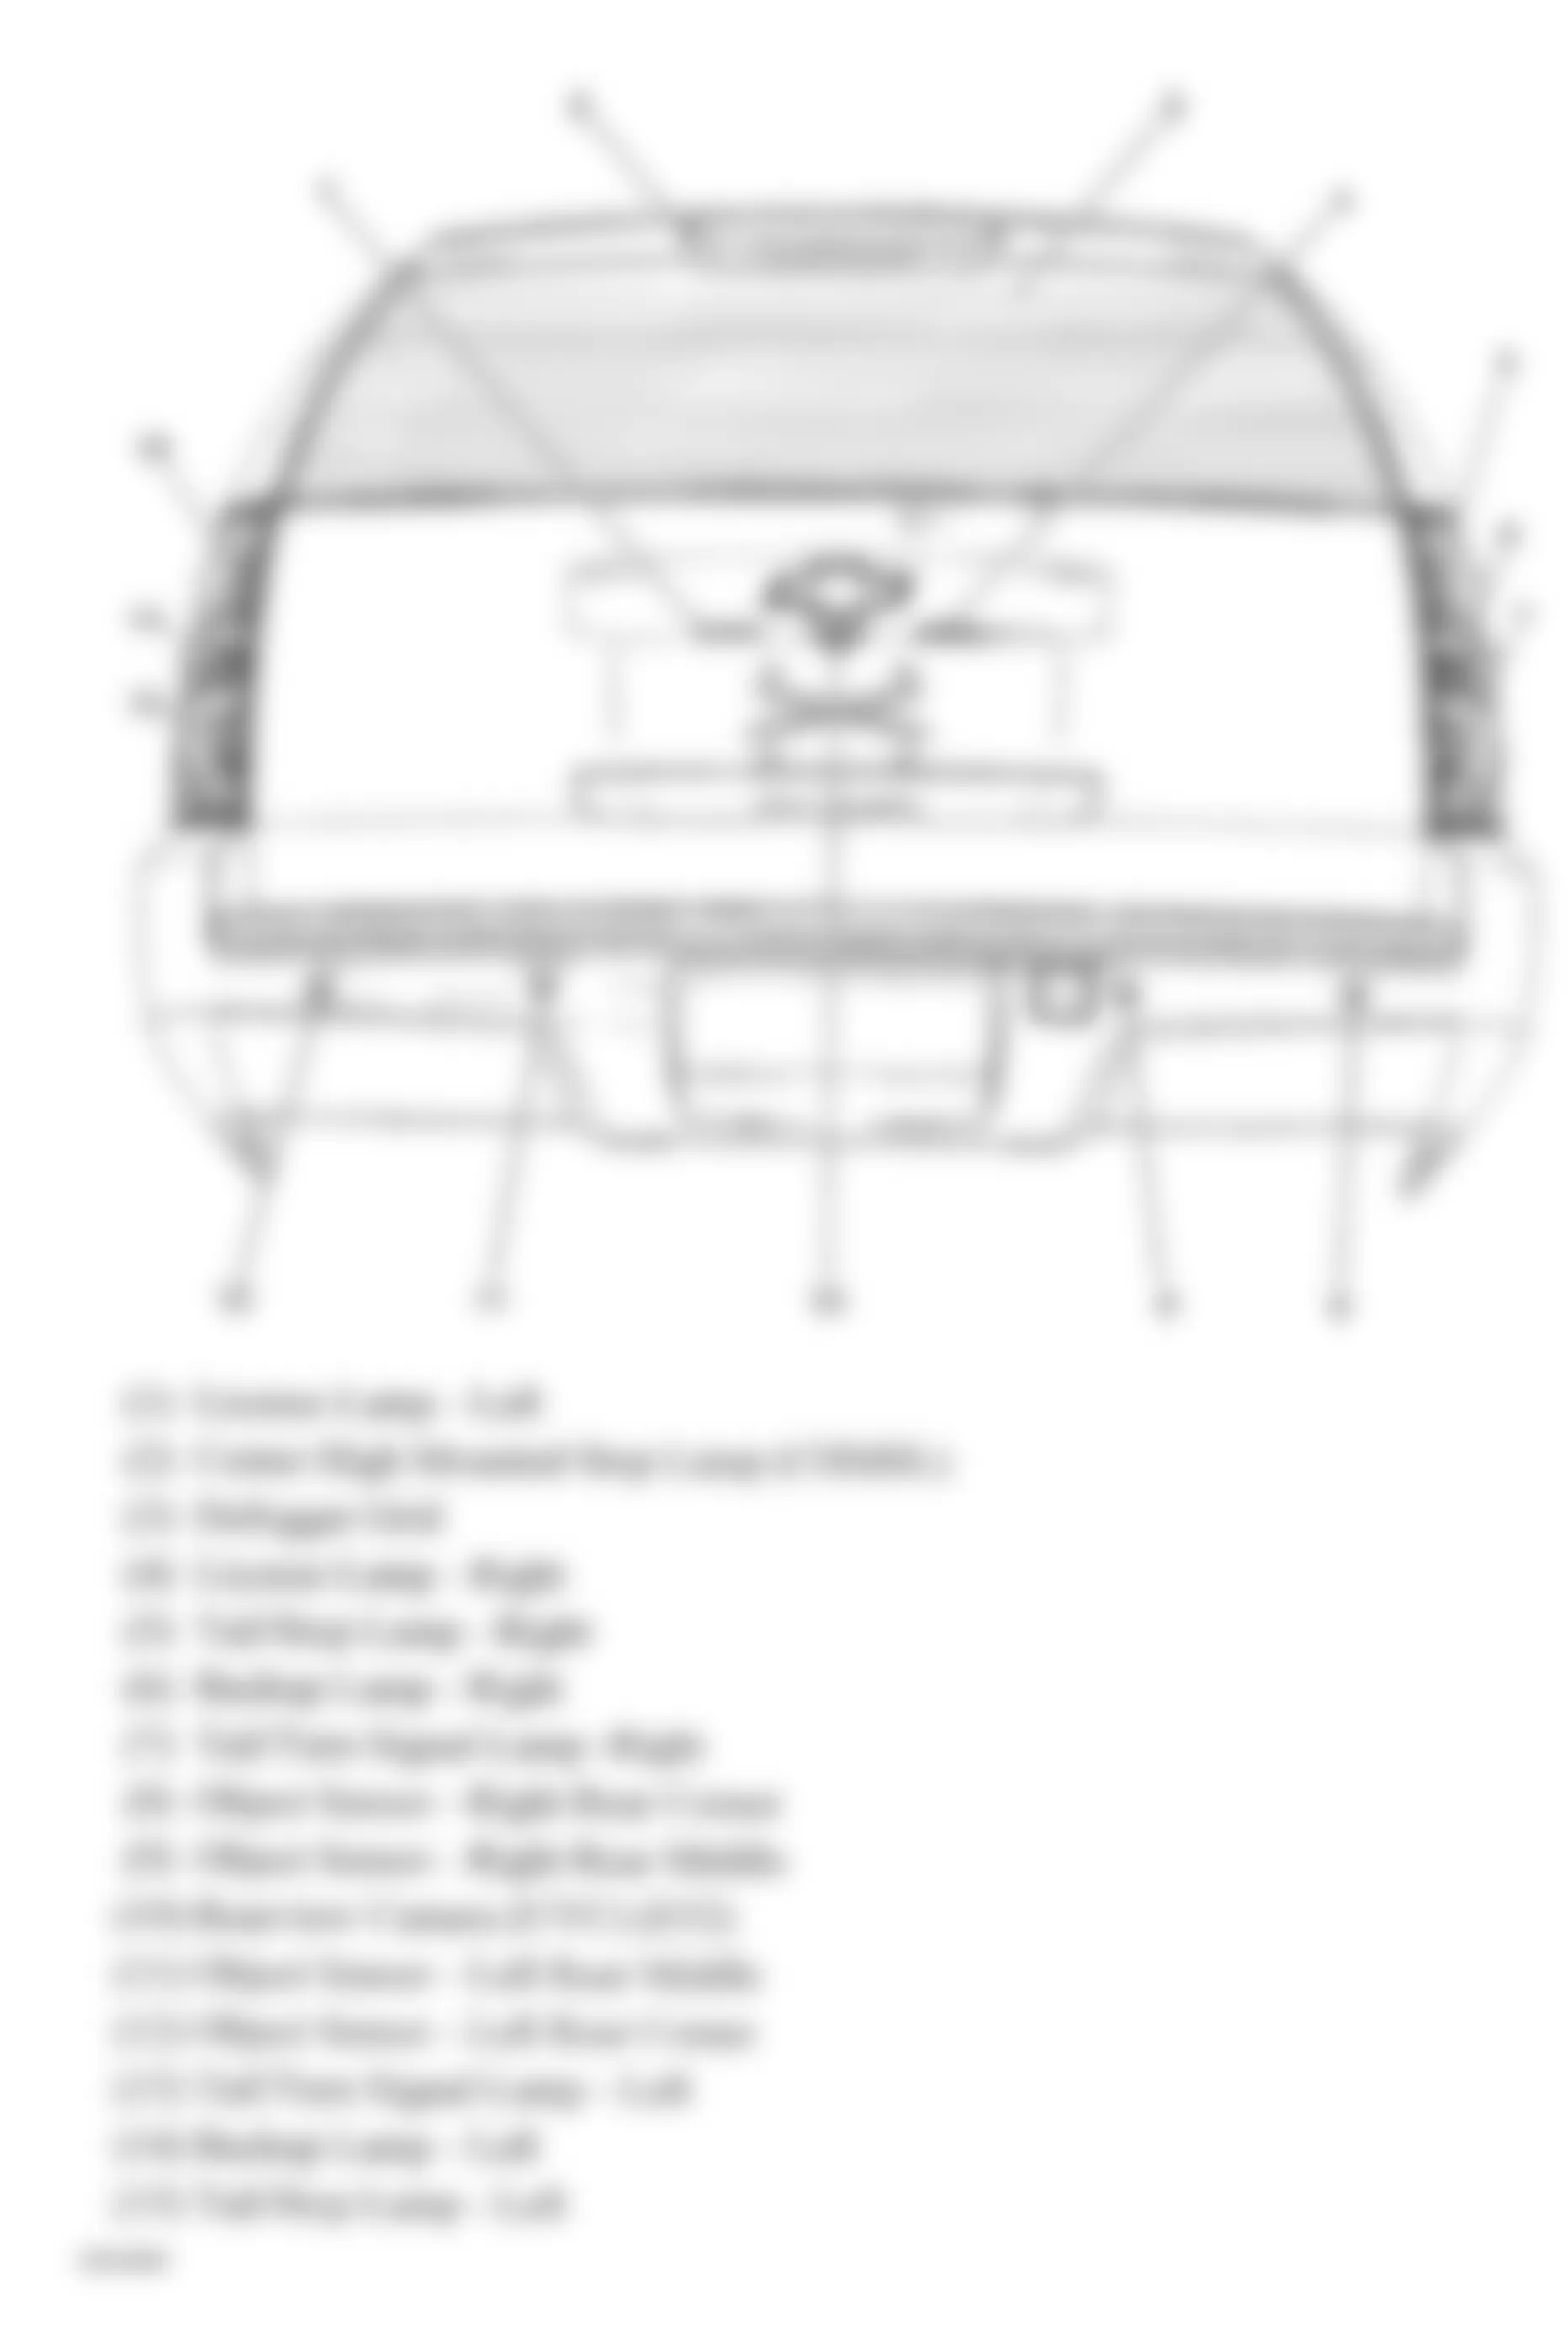 Chevrolet Suburban K2500 2010 - Component Locations -  Rear Of Vehicle (Avalanche, Suburban & Tahoe W/One Piece Liftgate)